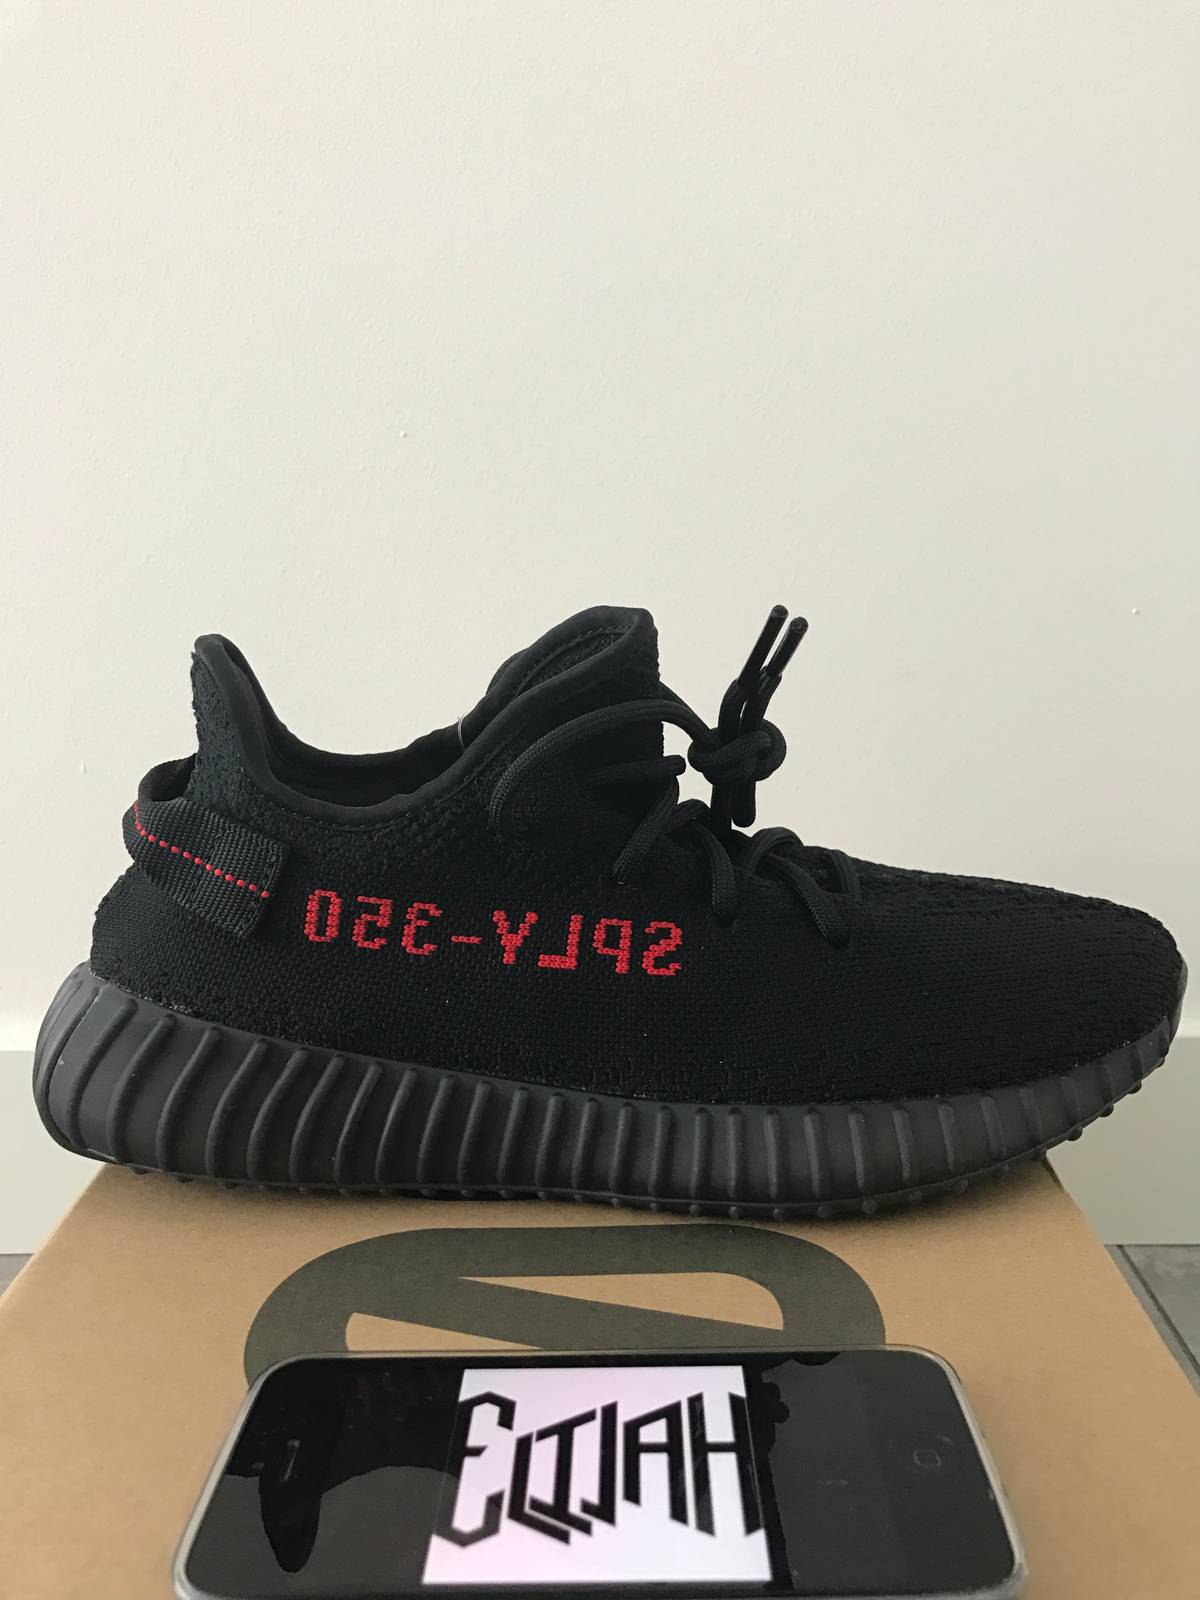 Adidas Yeezy Boost v2 Bred Unboxing.